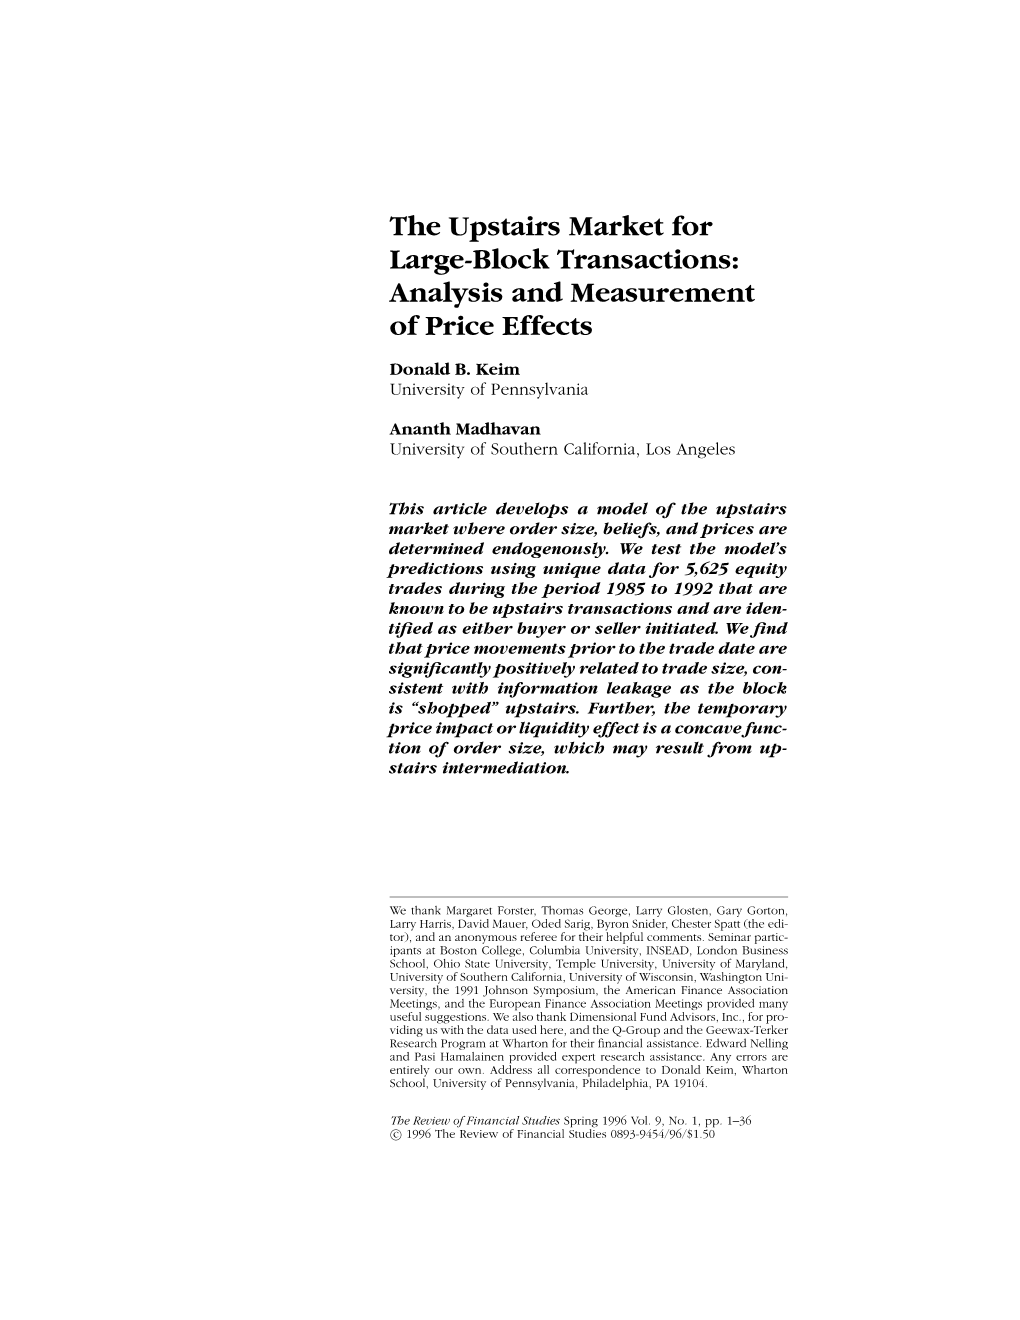 The Upstairs Market for Large-Block Transactions: Analysis and Measurement of Price Effects